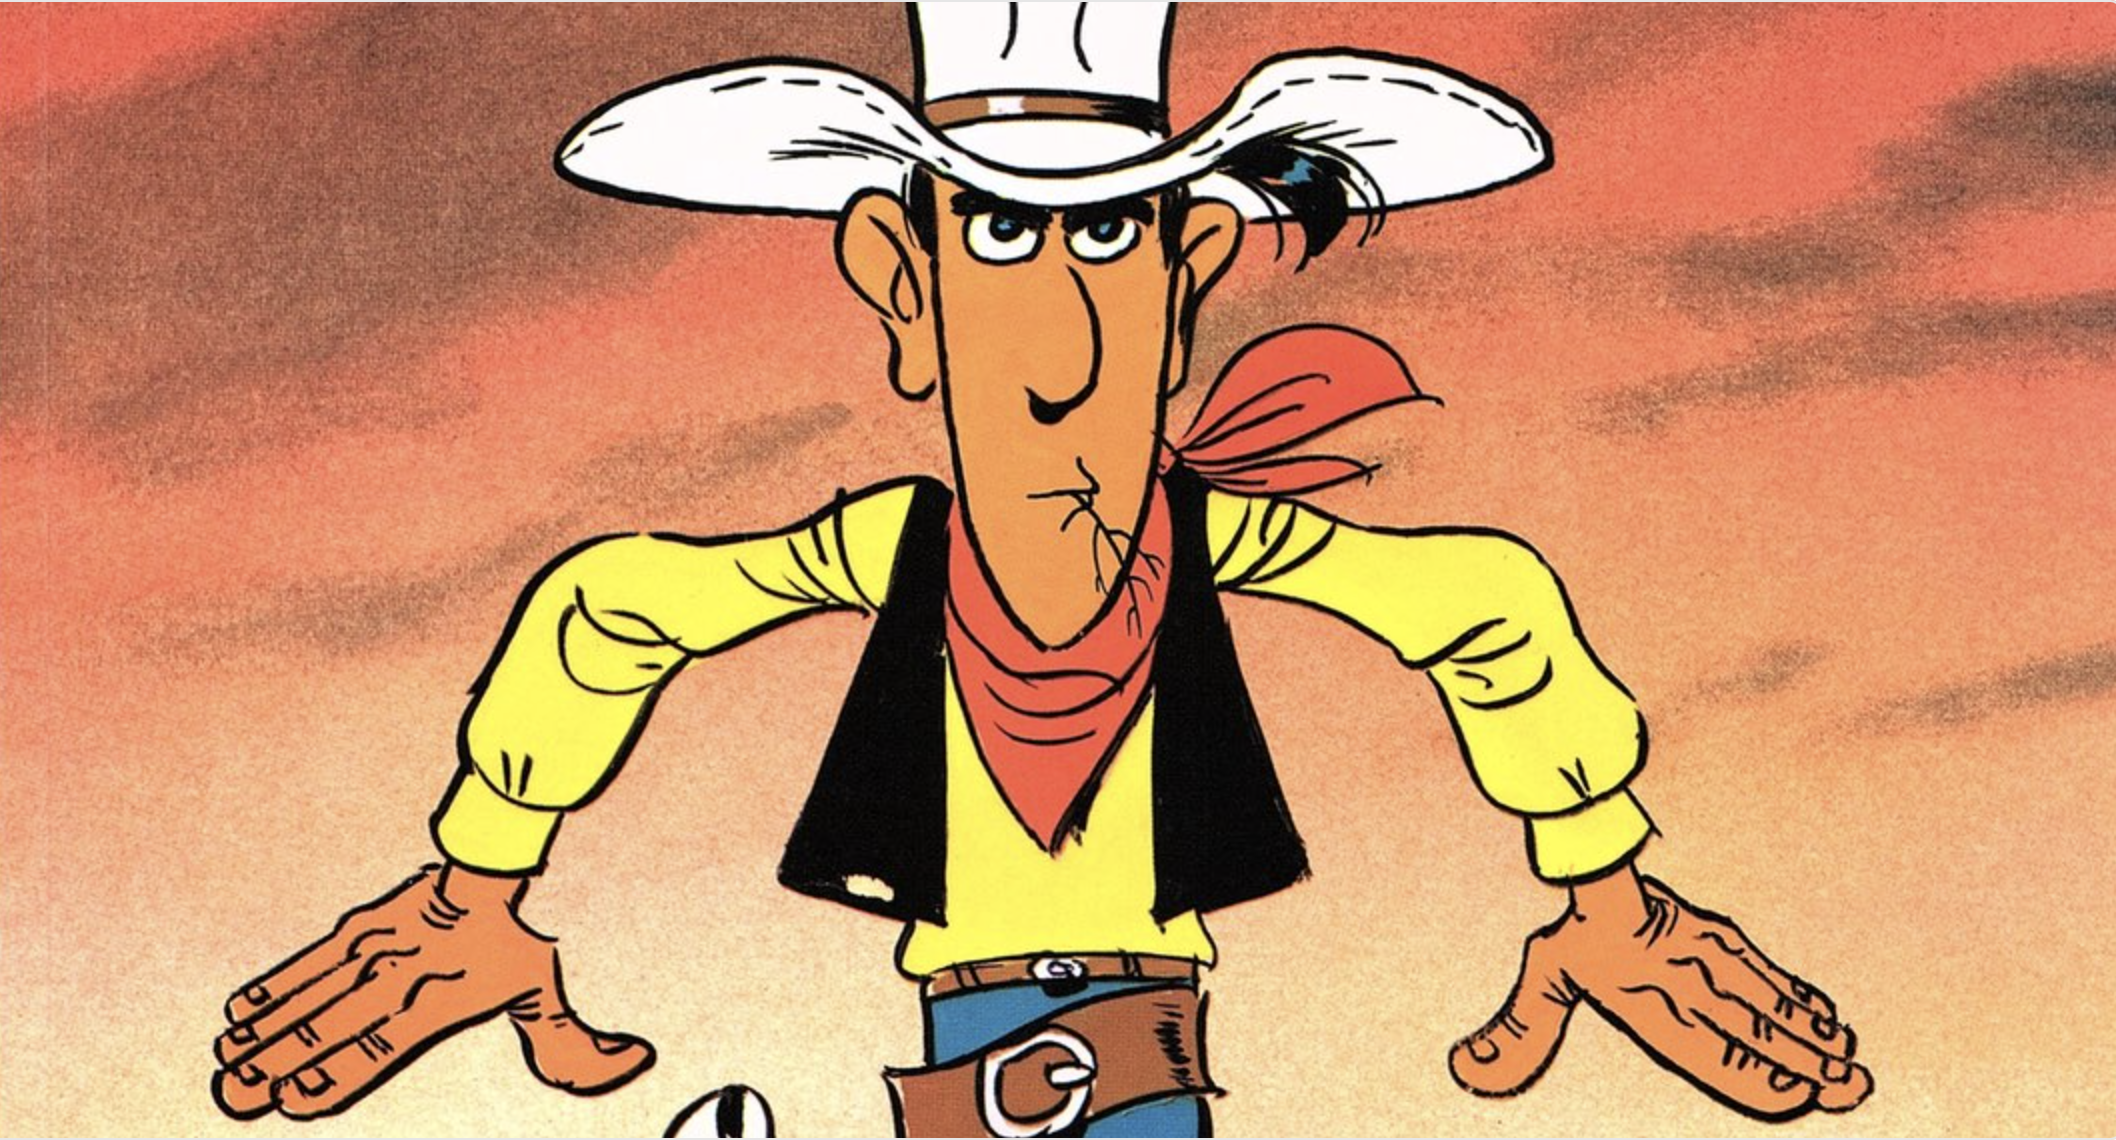 Lucky Luke Cartoon Goodies, transparent PNG images and more